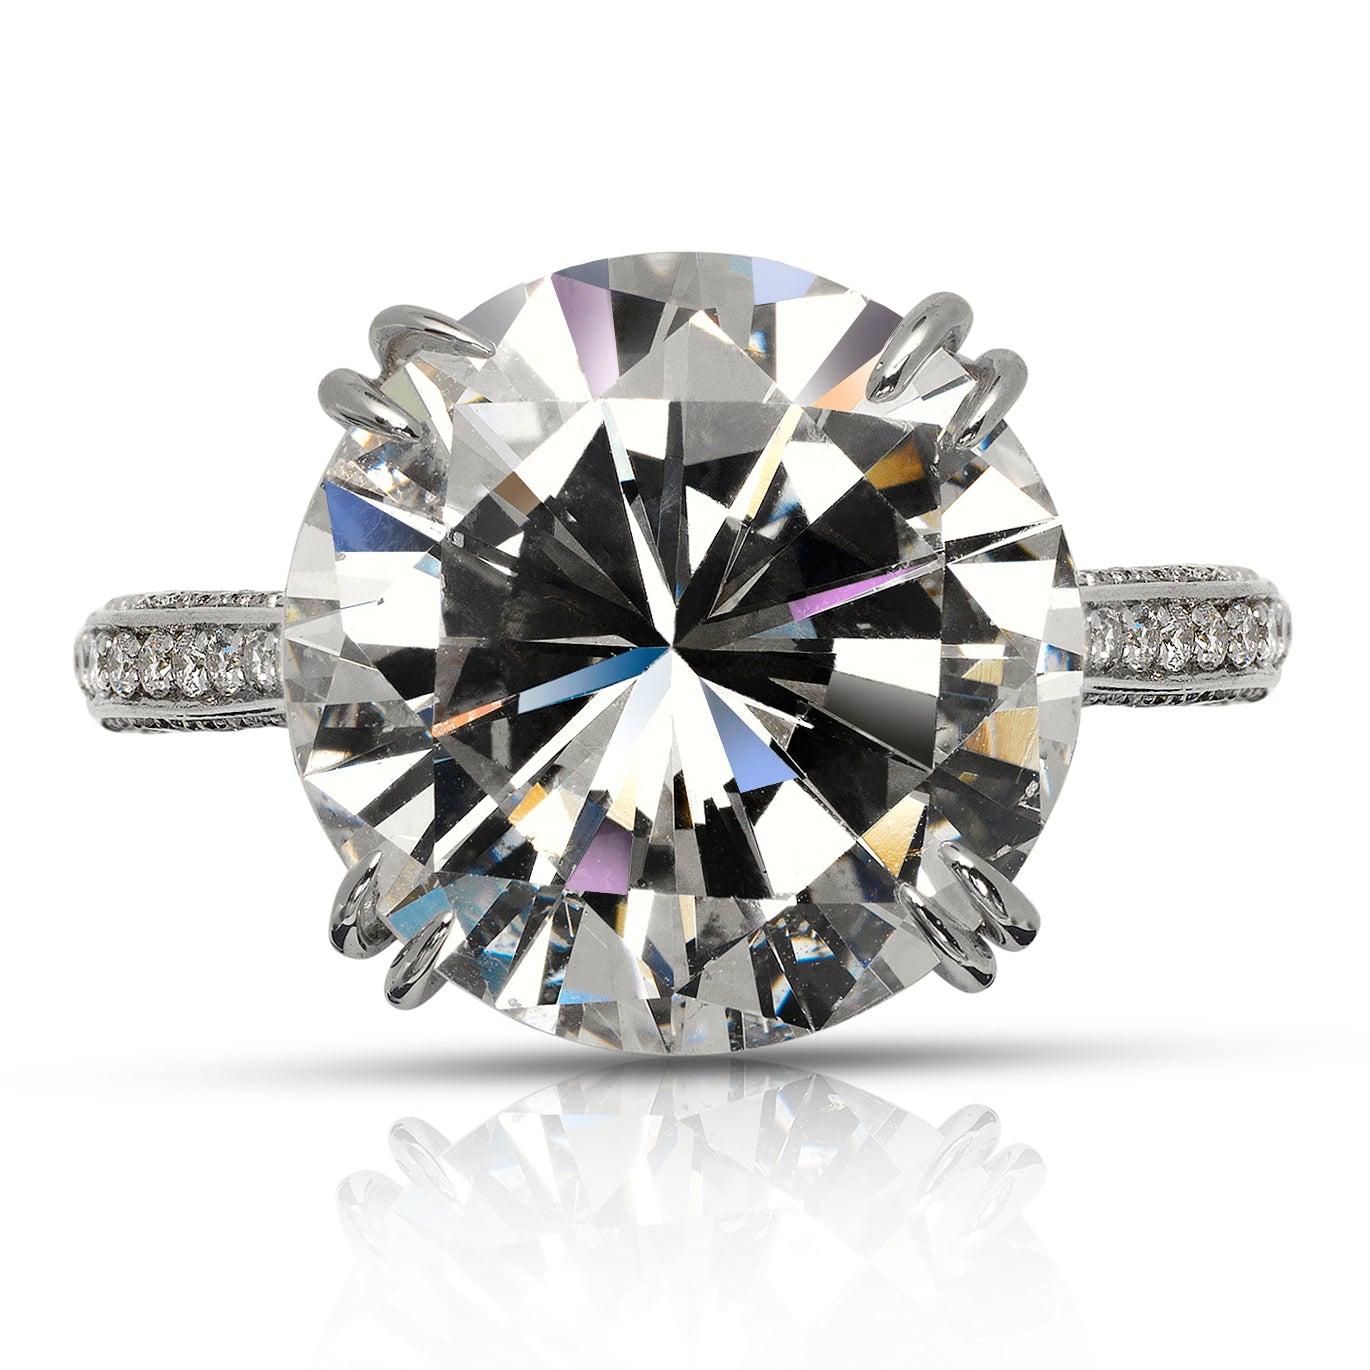 TATIANA -ROUND CUT DIAMOND ENGAGEMENT RING BY MIKE NEKTA

Center Diamond:

Carat Weight: 7 Carats
Color: E
Clarity: VS1
Style: PEAR BRILLIANT
Approximate Measurements: 
* Clarity Enhanced
 
Ring:
Metal: 18K WHITE GOLD 
Style: 4 PRONG SOLITAIRE,